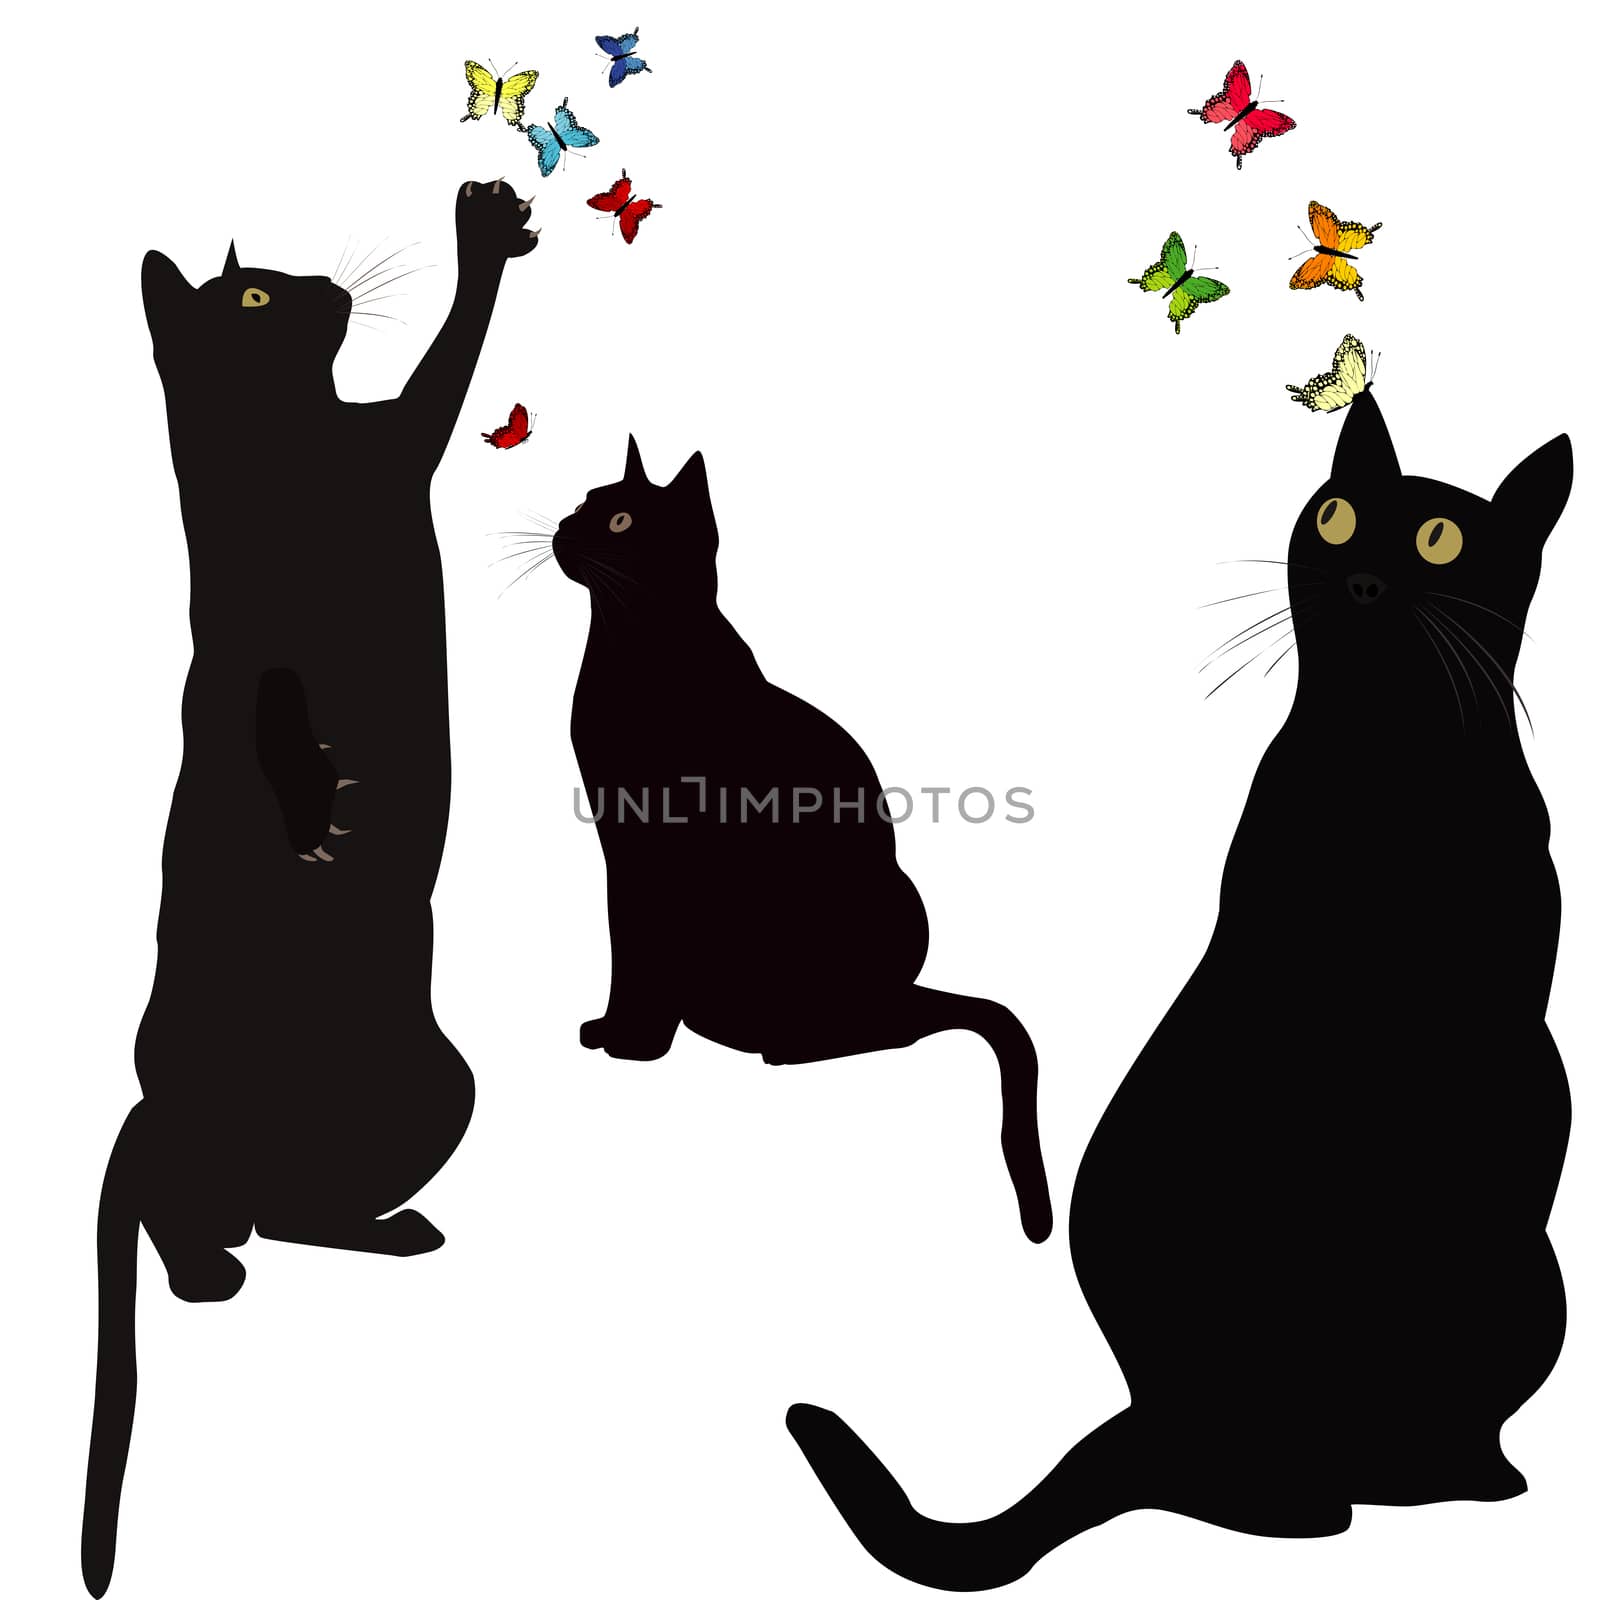 Black cats silhouettes and colorful butterlies